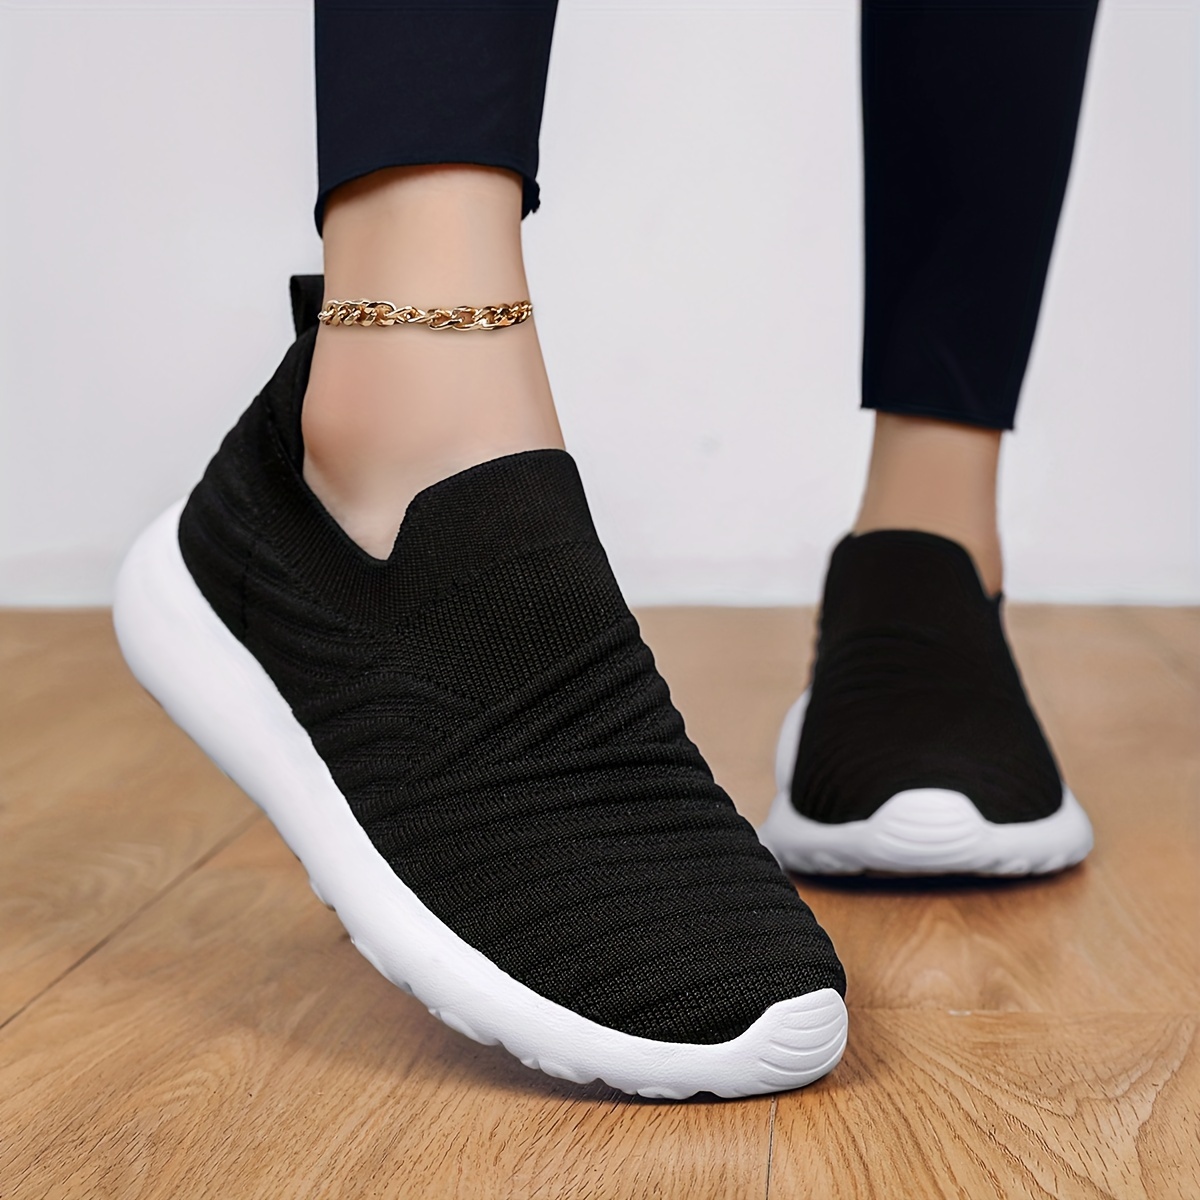 

Women's Fashion Knit Textured Breathable Slip-on Walking Shoes, Anti-slip Wear-resistant Lightweight Casual Sneakers